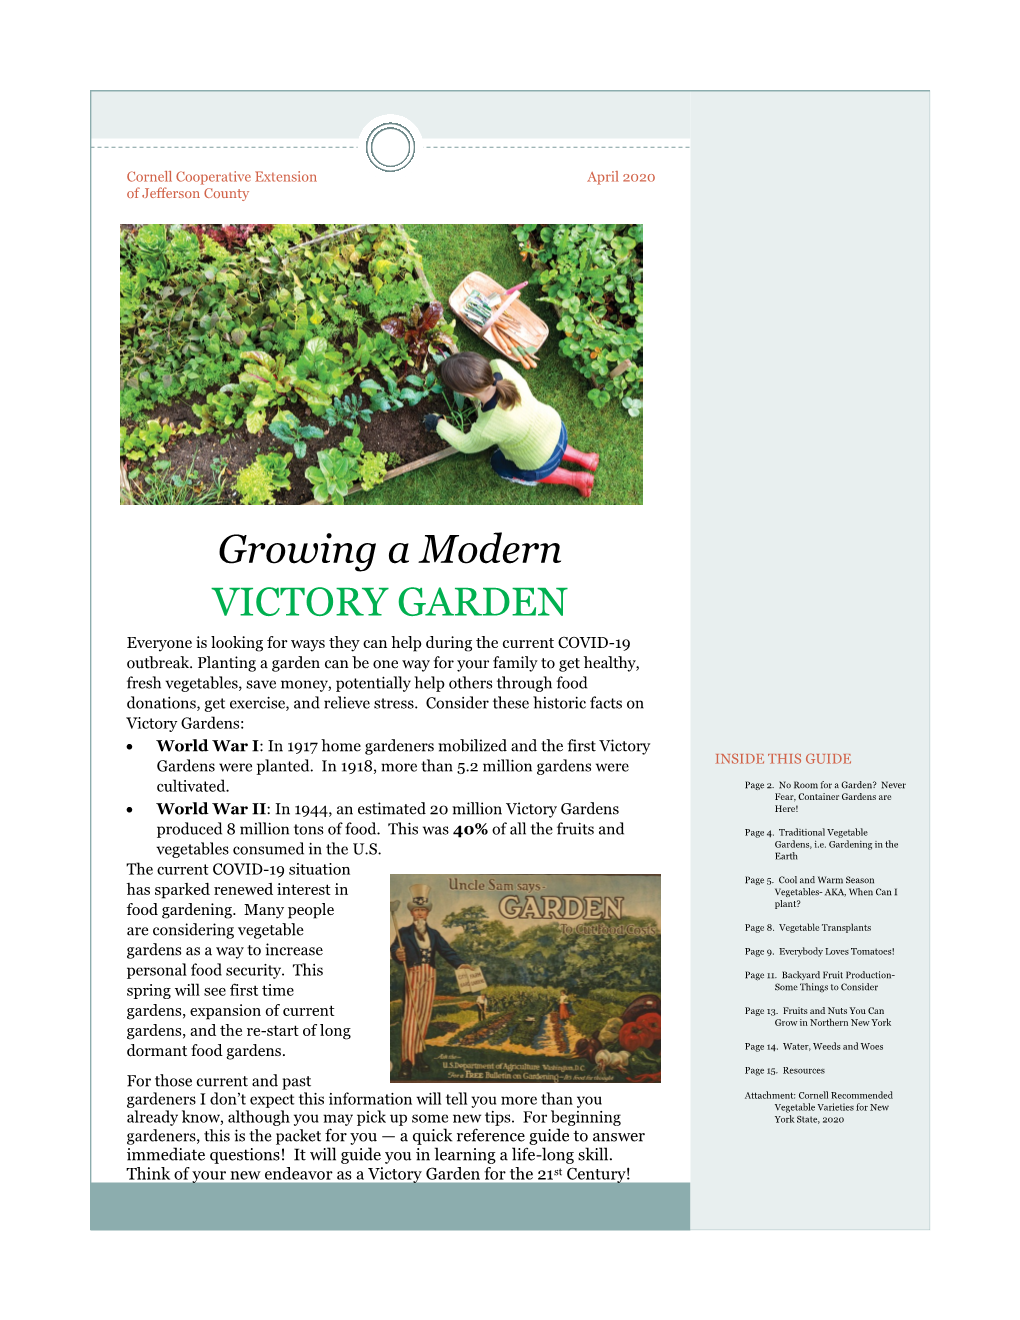 Growing a Modern VICTORY GARDEN Everyone Is Looking for Ways They Can Help During the Current COVID-19 Outbreak